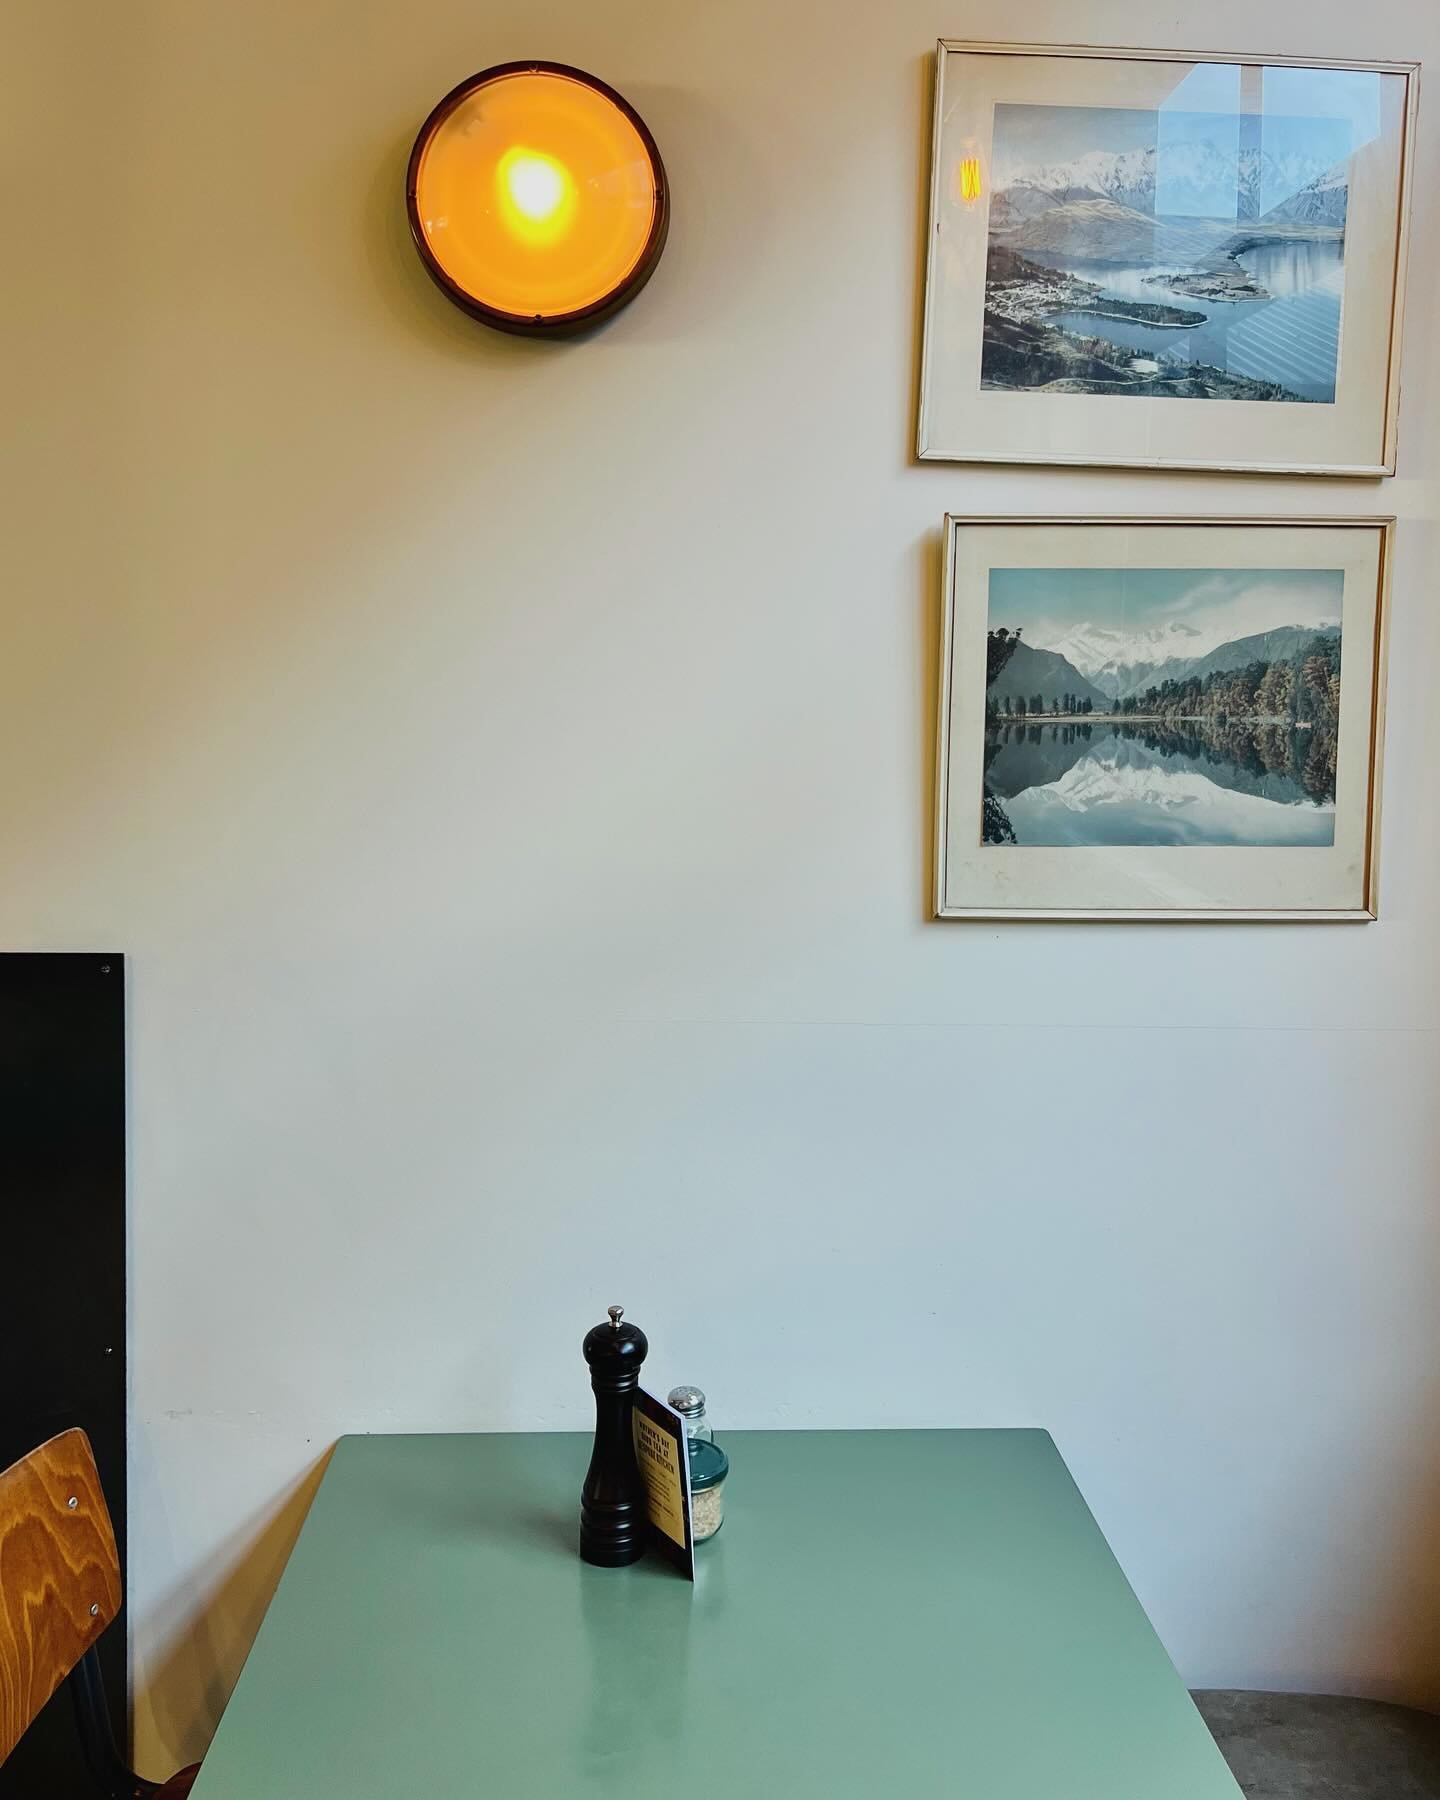 Theres always a cosy corner at Bespoke Kitchen for the poetic traveler to perch up and write ✍️ 

Wifi available + charging station for your flat devices 🪫 

@allpressespresso coffee and freshly made food for you to waste the hours. 

#bespokekitche